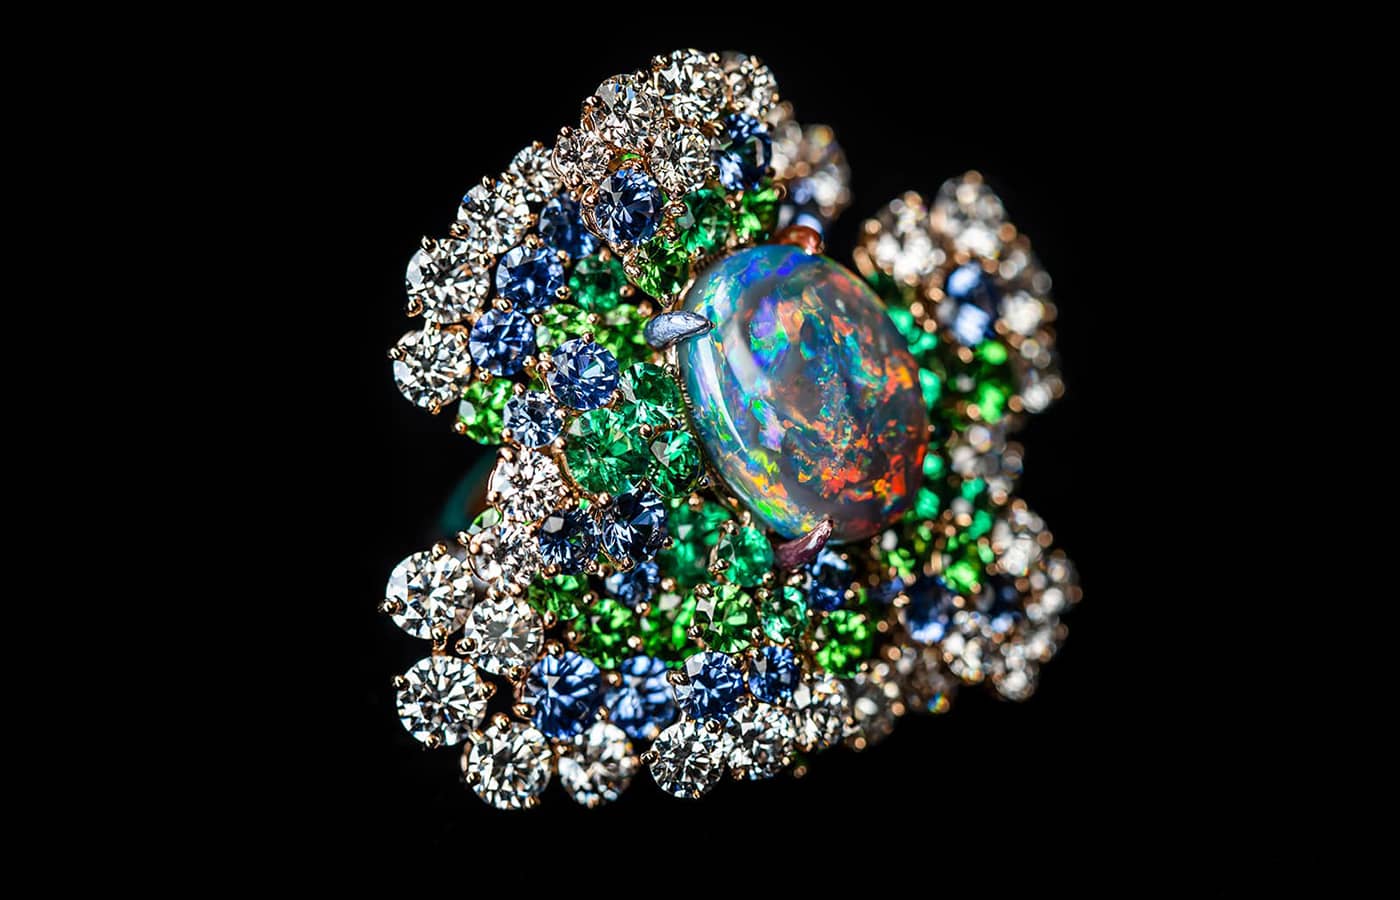 Close up of the Dior Joaillerie Rose necklace in white and rose gold, diamonds, black opal, tsavorite garnets, sapphires, emeralds, purple, red, green and blue lacquers from the Dearest Dior High Jewellery collection